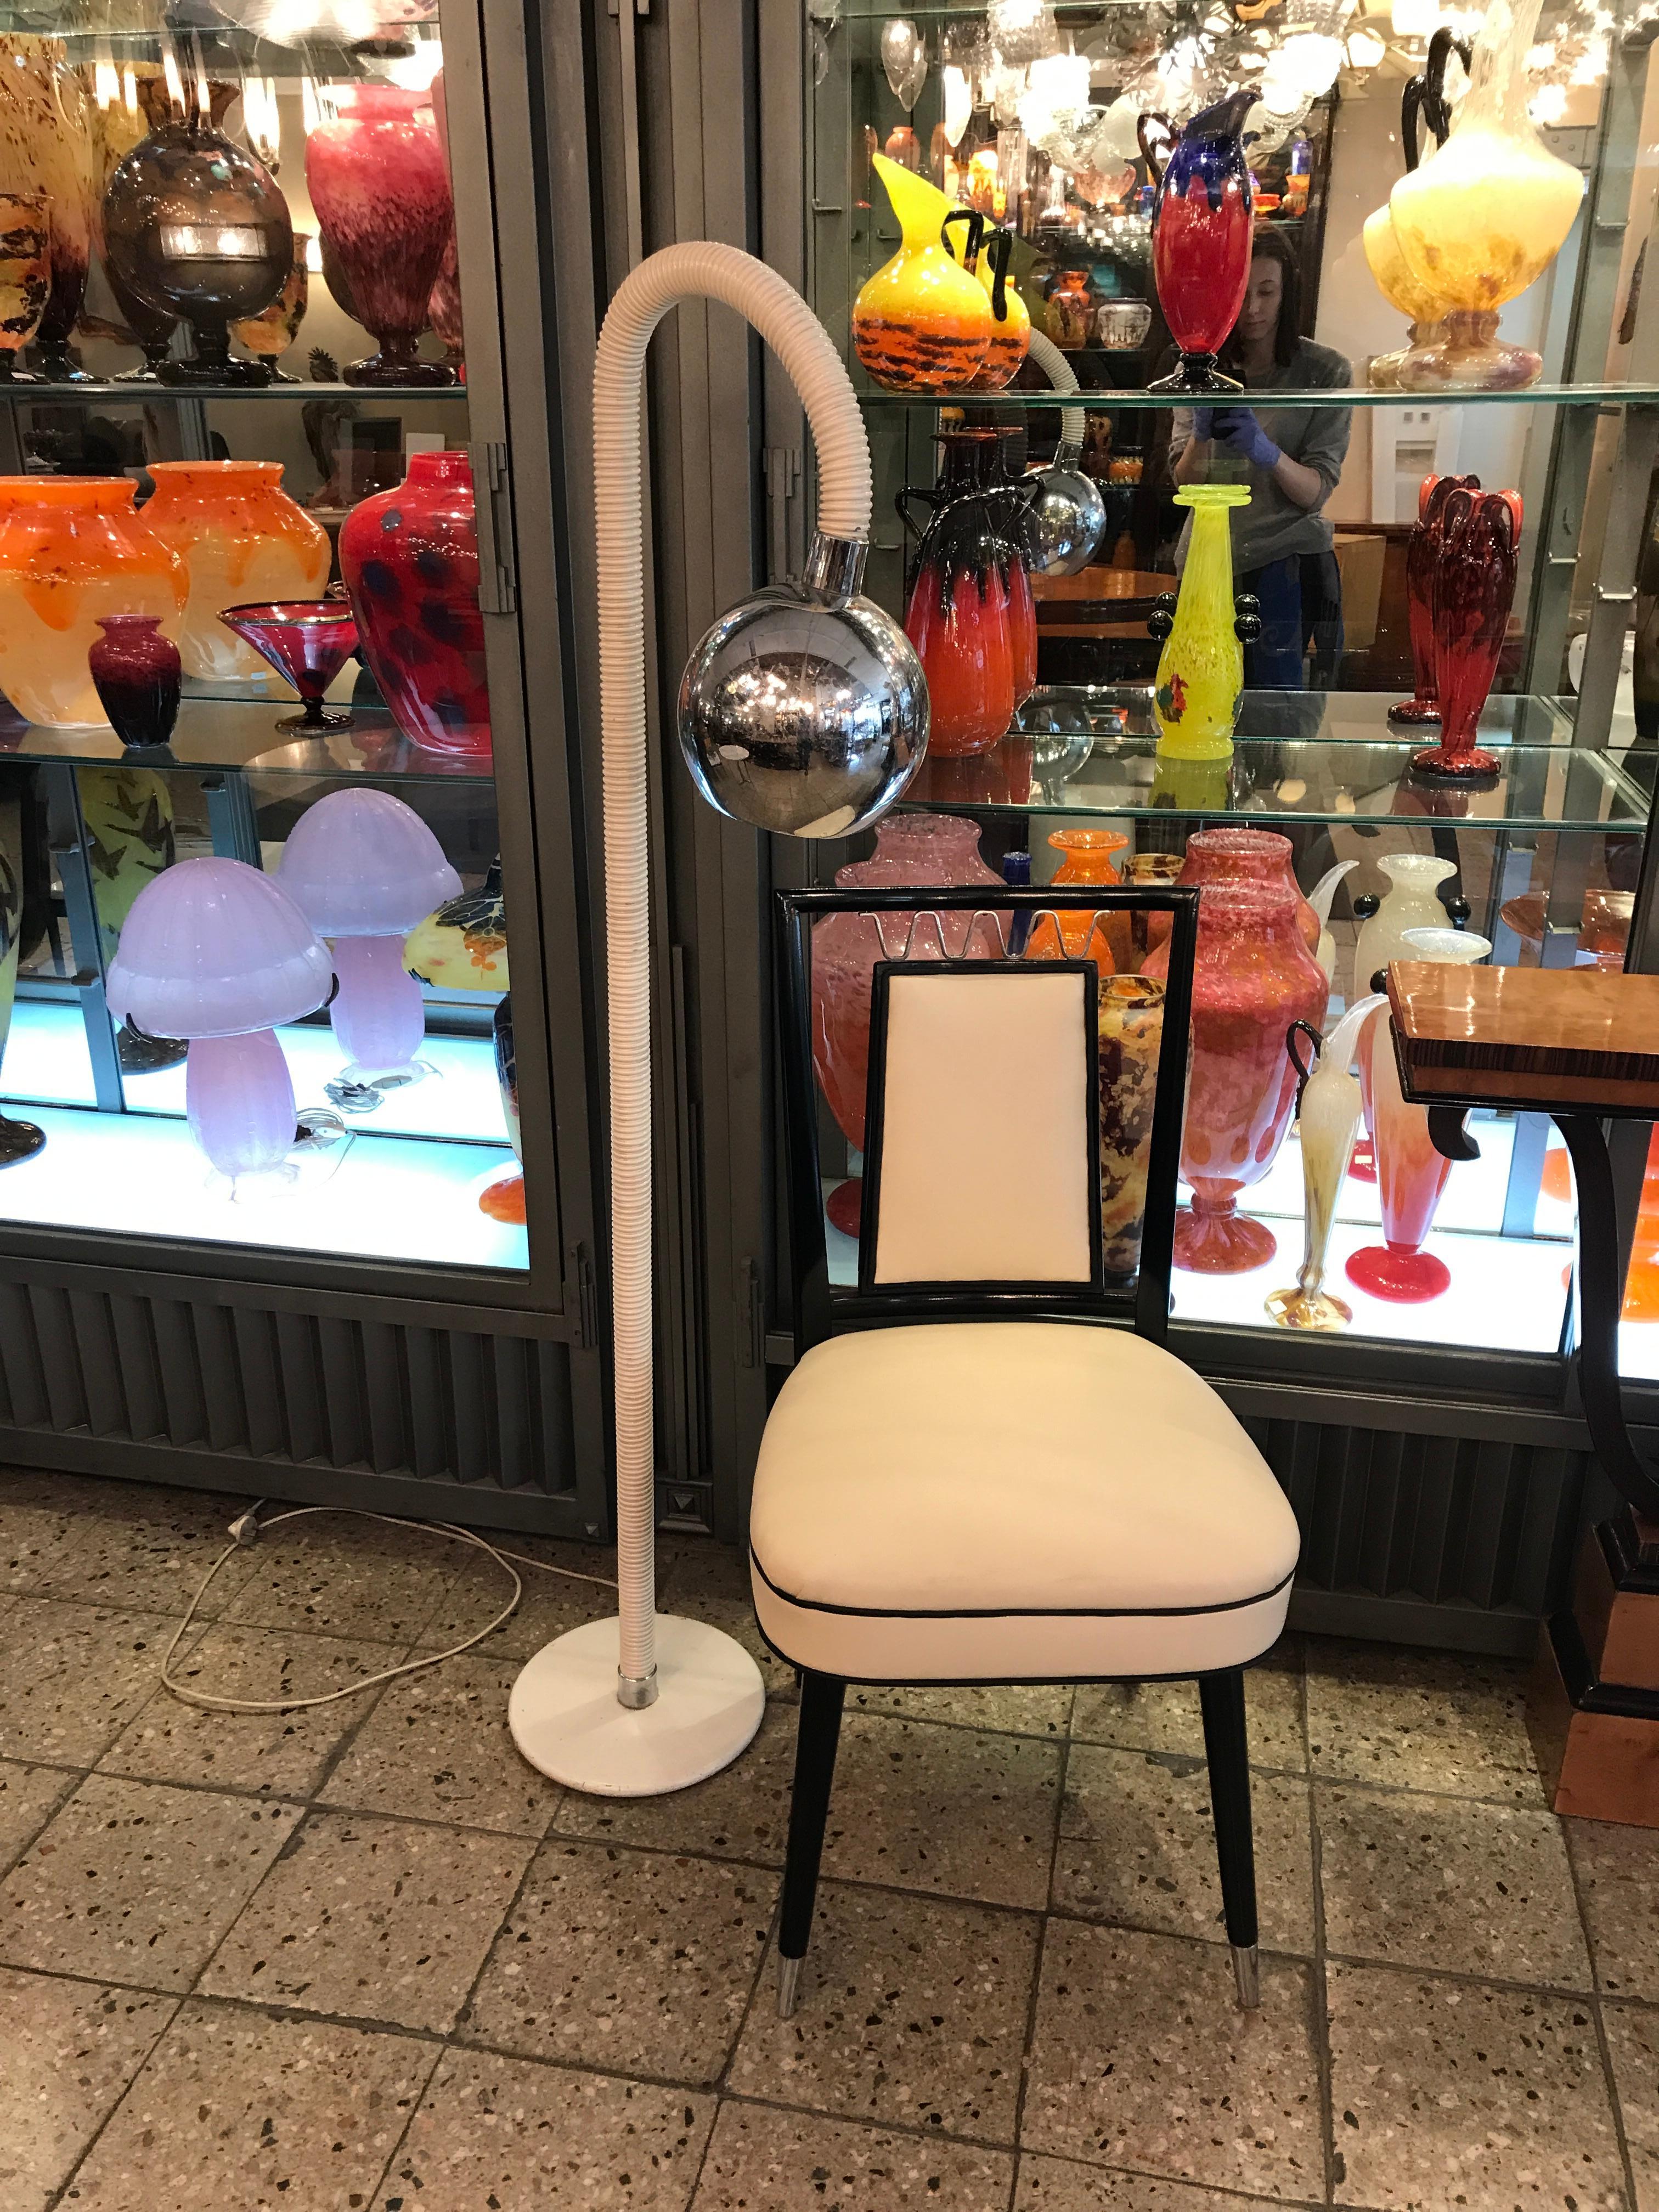 Floor lamp Art Deco

Material: chrome and glass
German
1920
You want to live in the golden years, those are the floor lamps that your project needs.
We have specialized in of Art Deco and Art Nouveau styles since 1982.
Pushing the button that reads